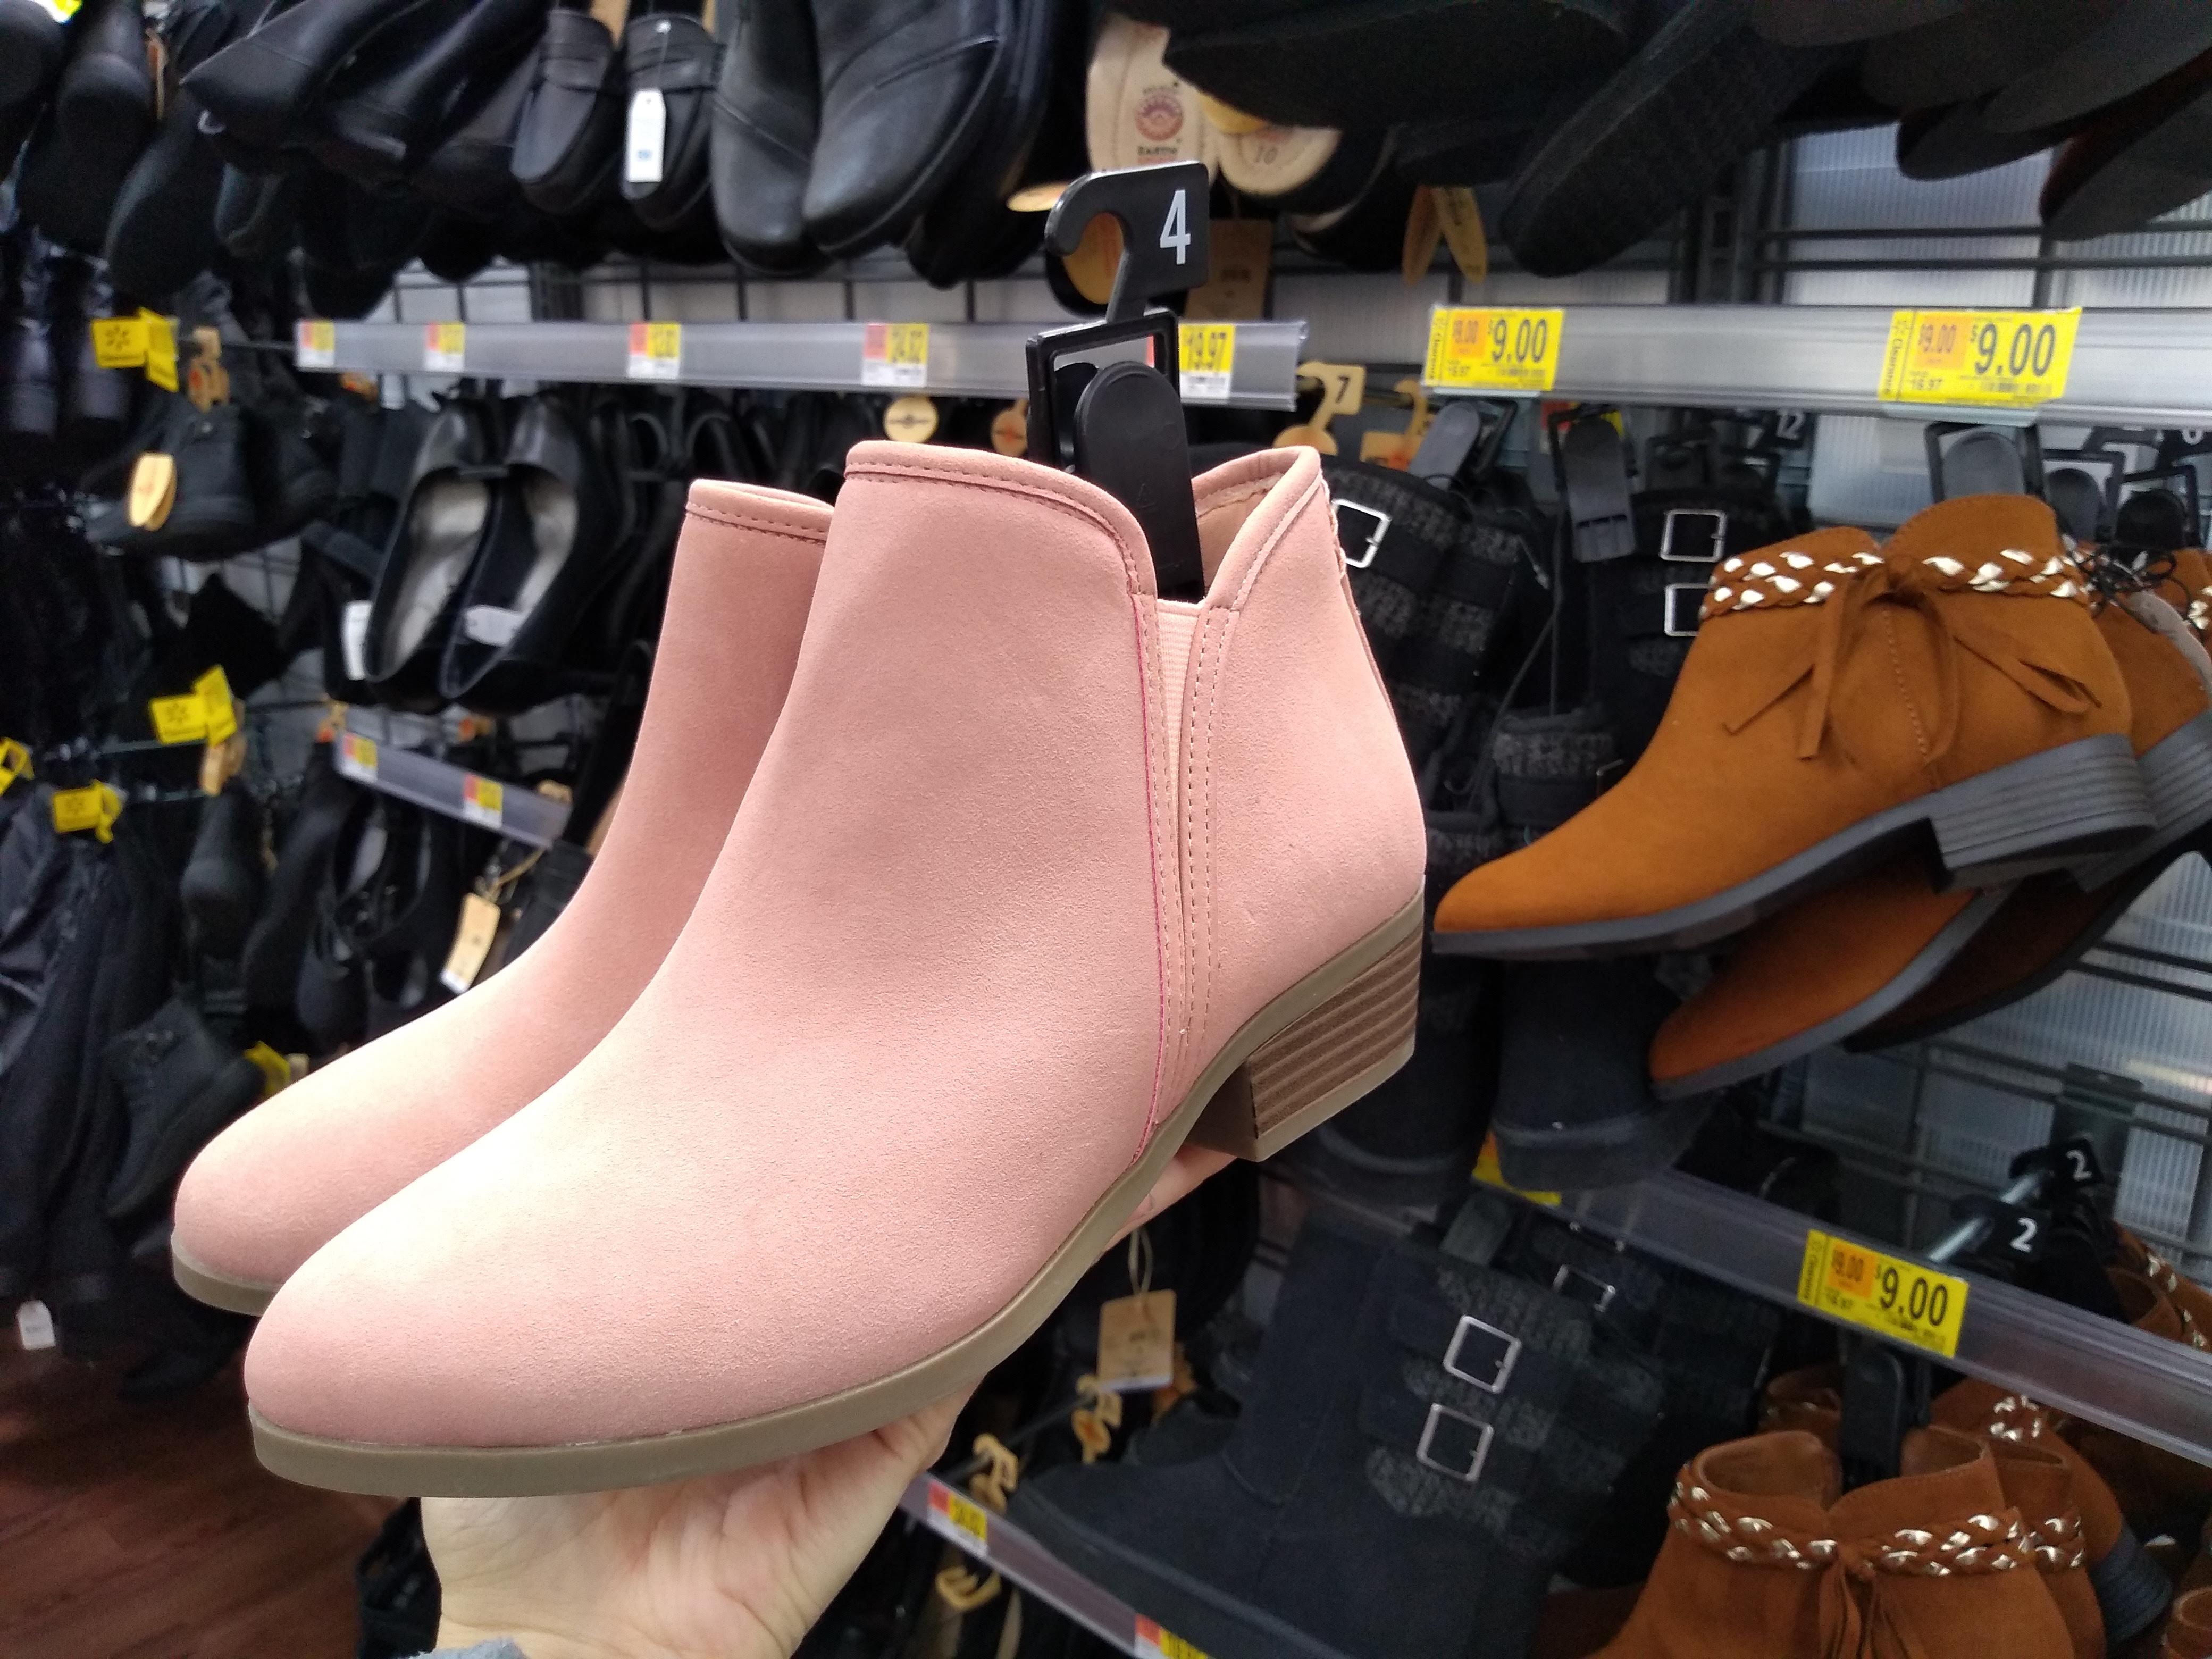 Walmart Clearance: Girls' Boots, as Low 